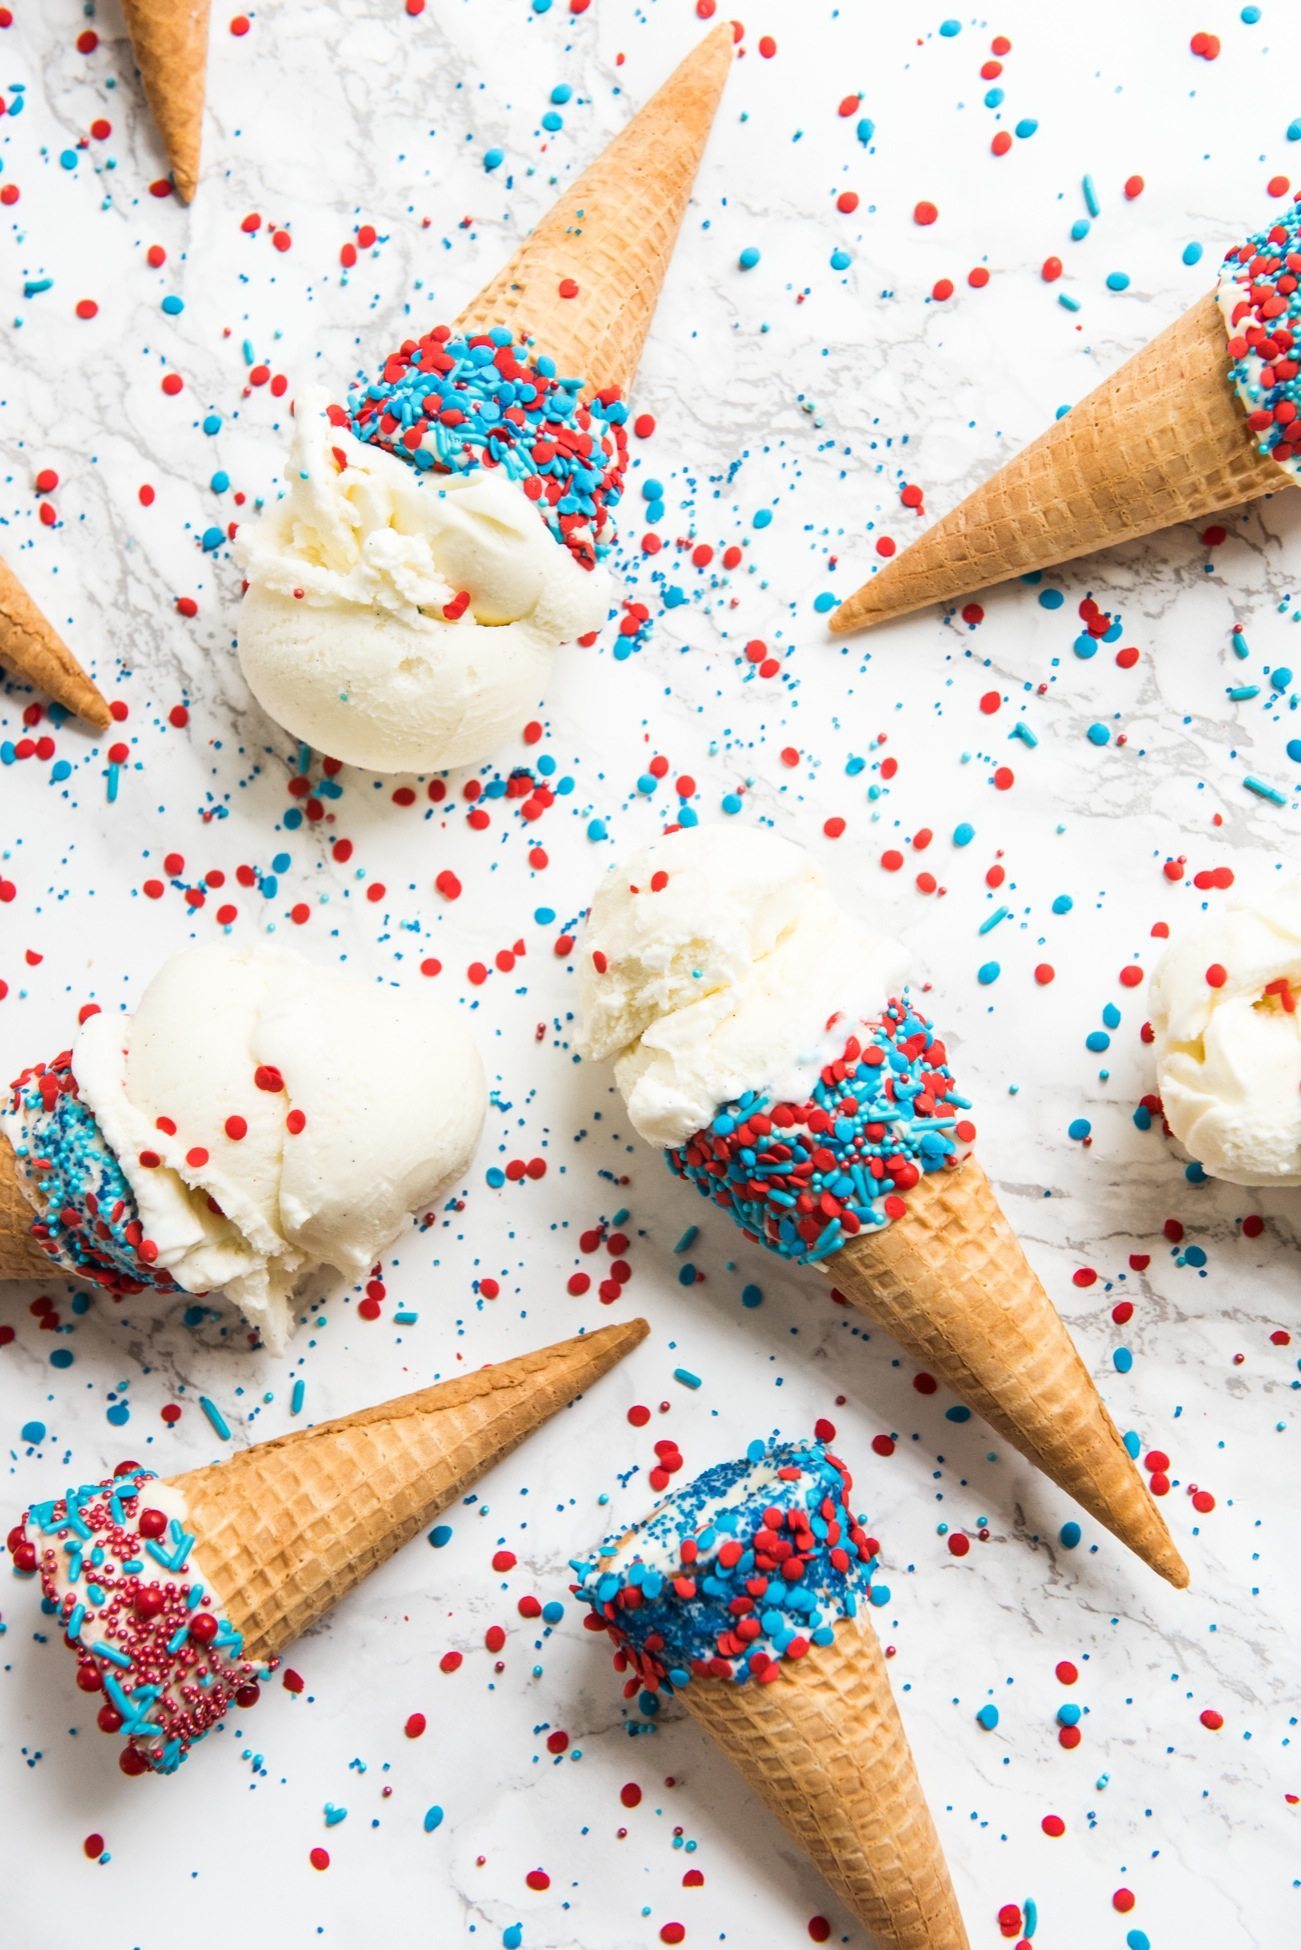 4th of July Desserts | Dessert recipes, holiday crafts, entertaining tips, party ideas and more from @cydconverse